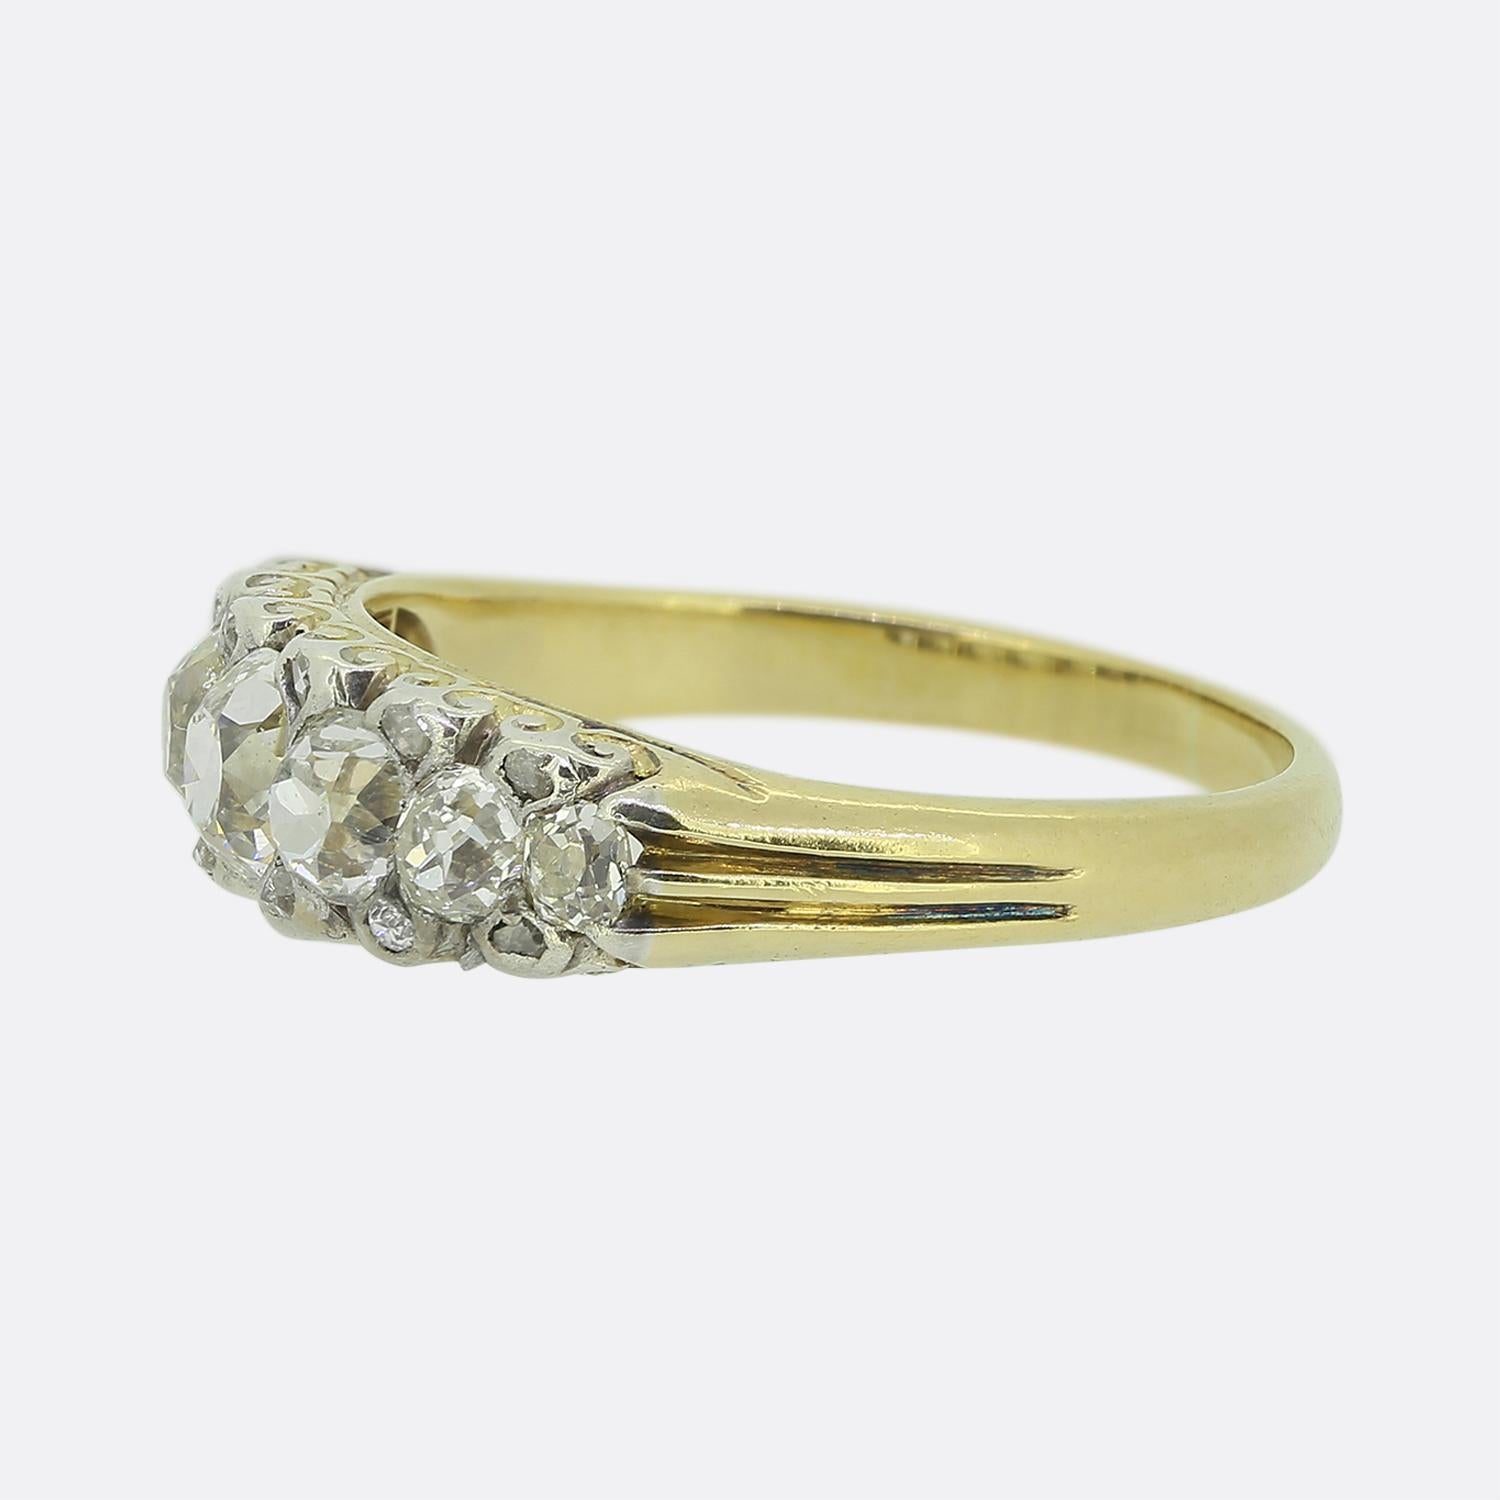 Here we have a classic seven-stone diamond ring dating back to the Edwardian period. This antique piece features seven old mine cut diamonds in a single line formation across the face. Each of these chunky stones has been set in platinum and is